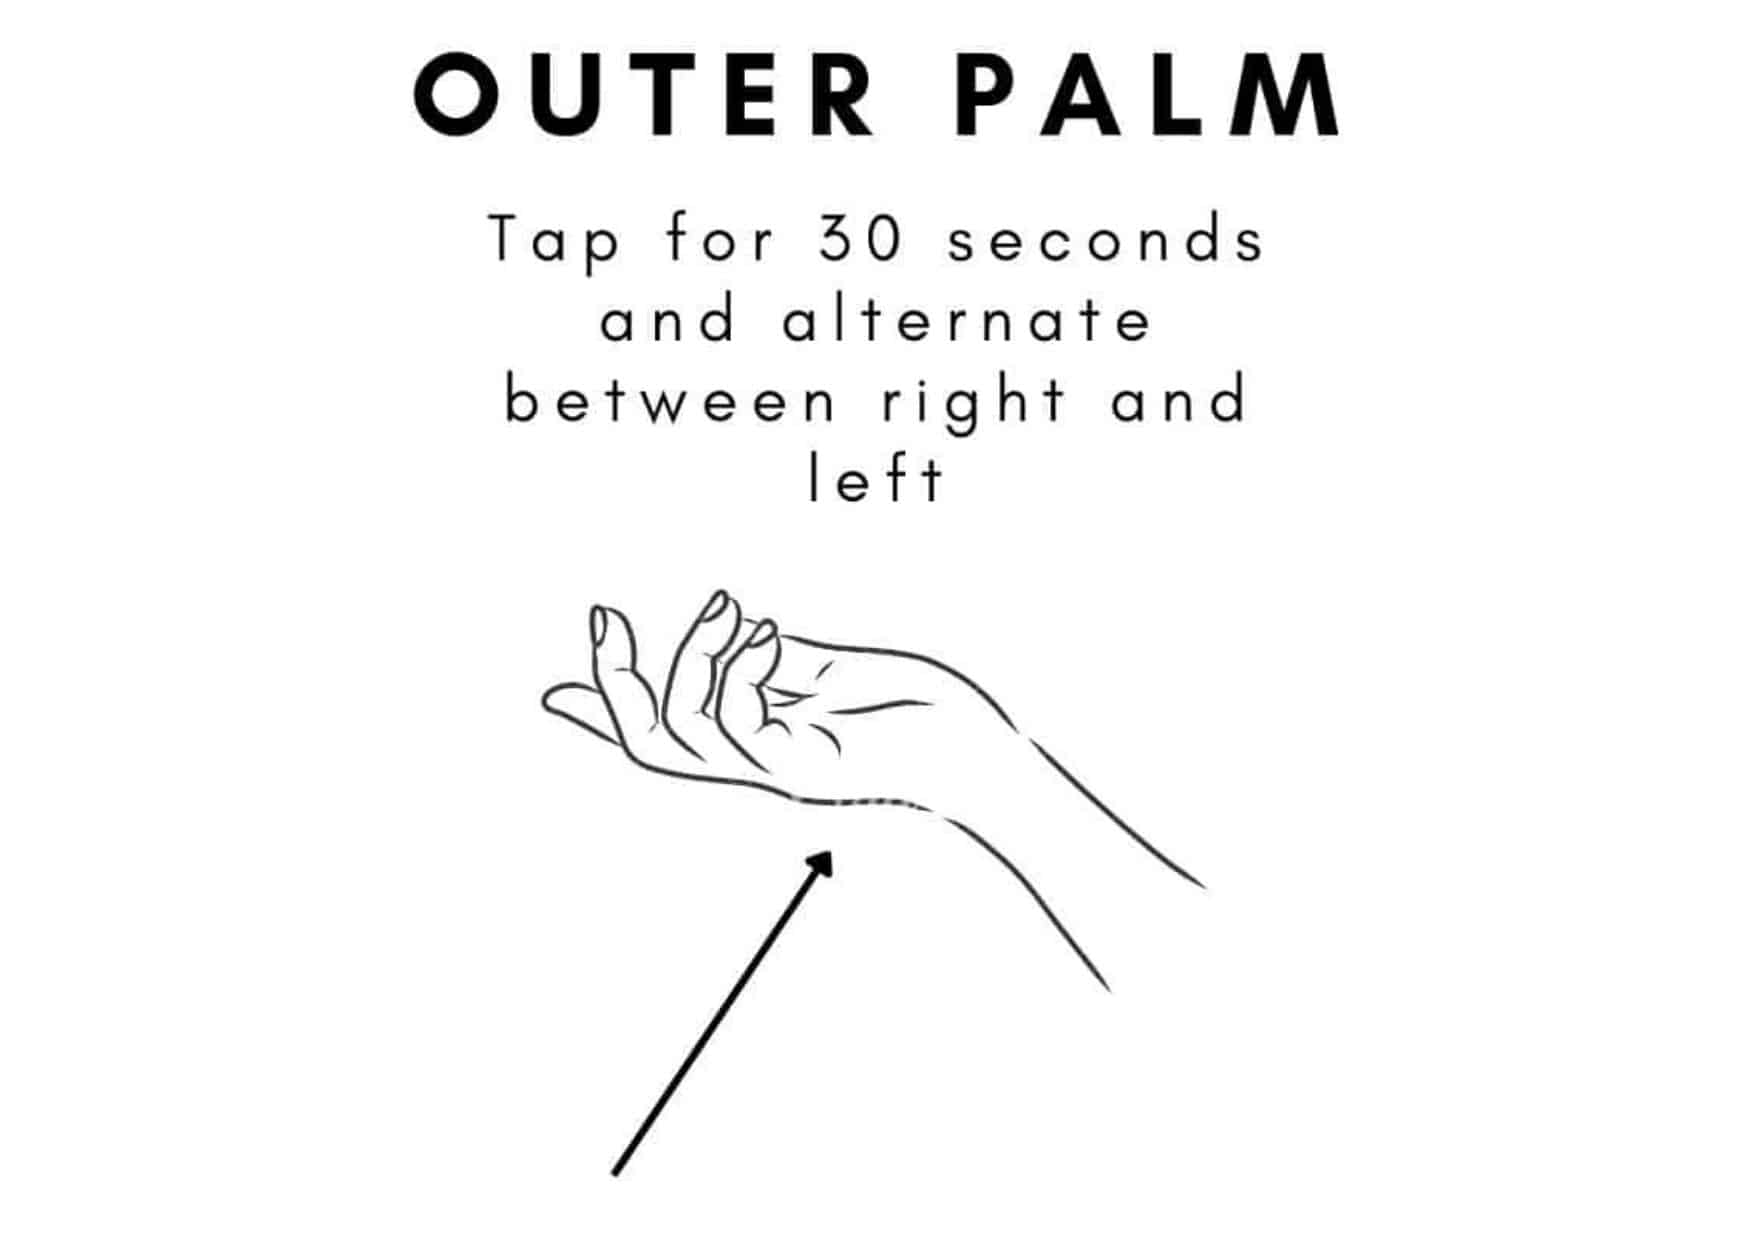 tapping the outer palm